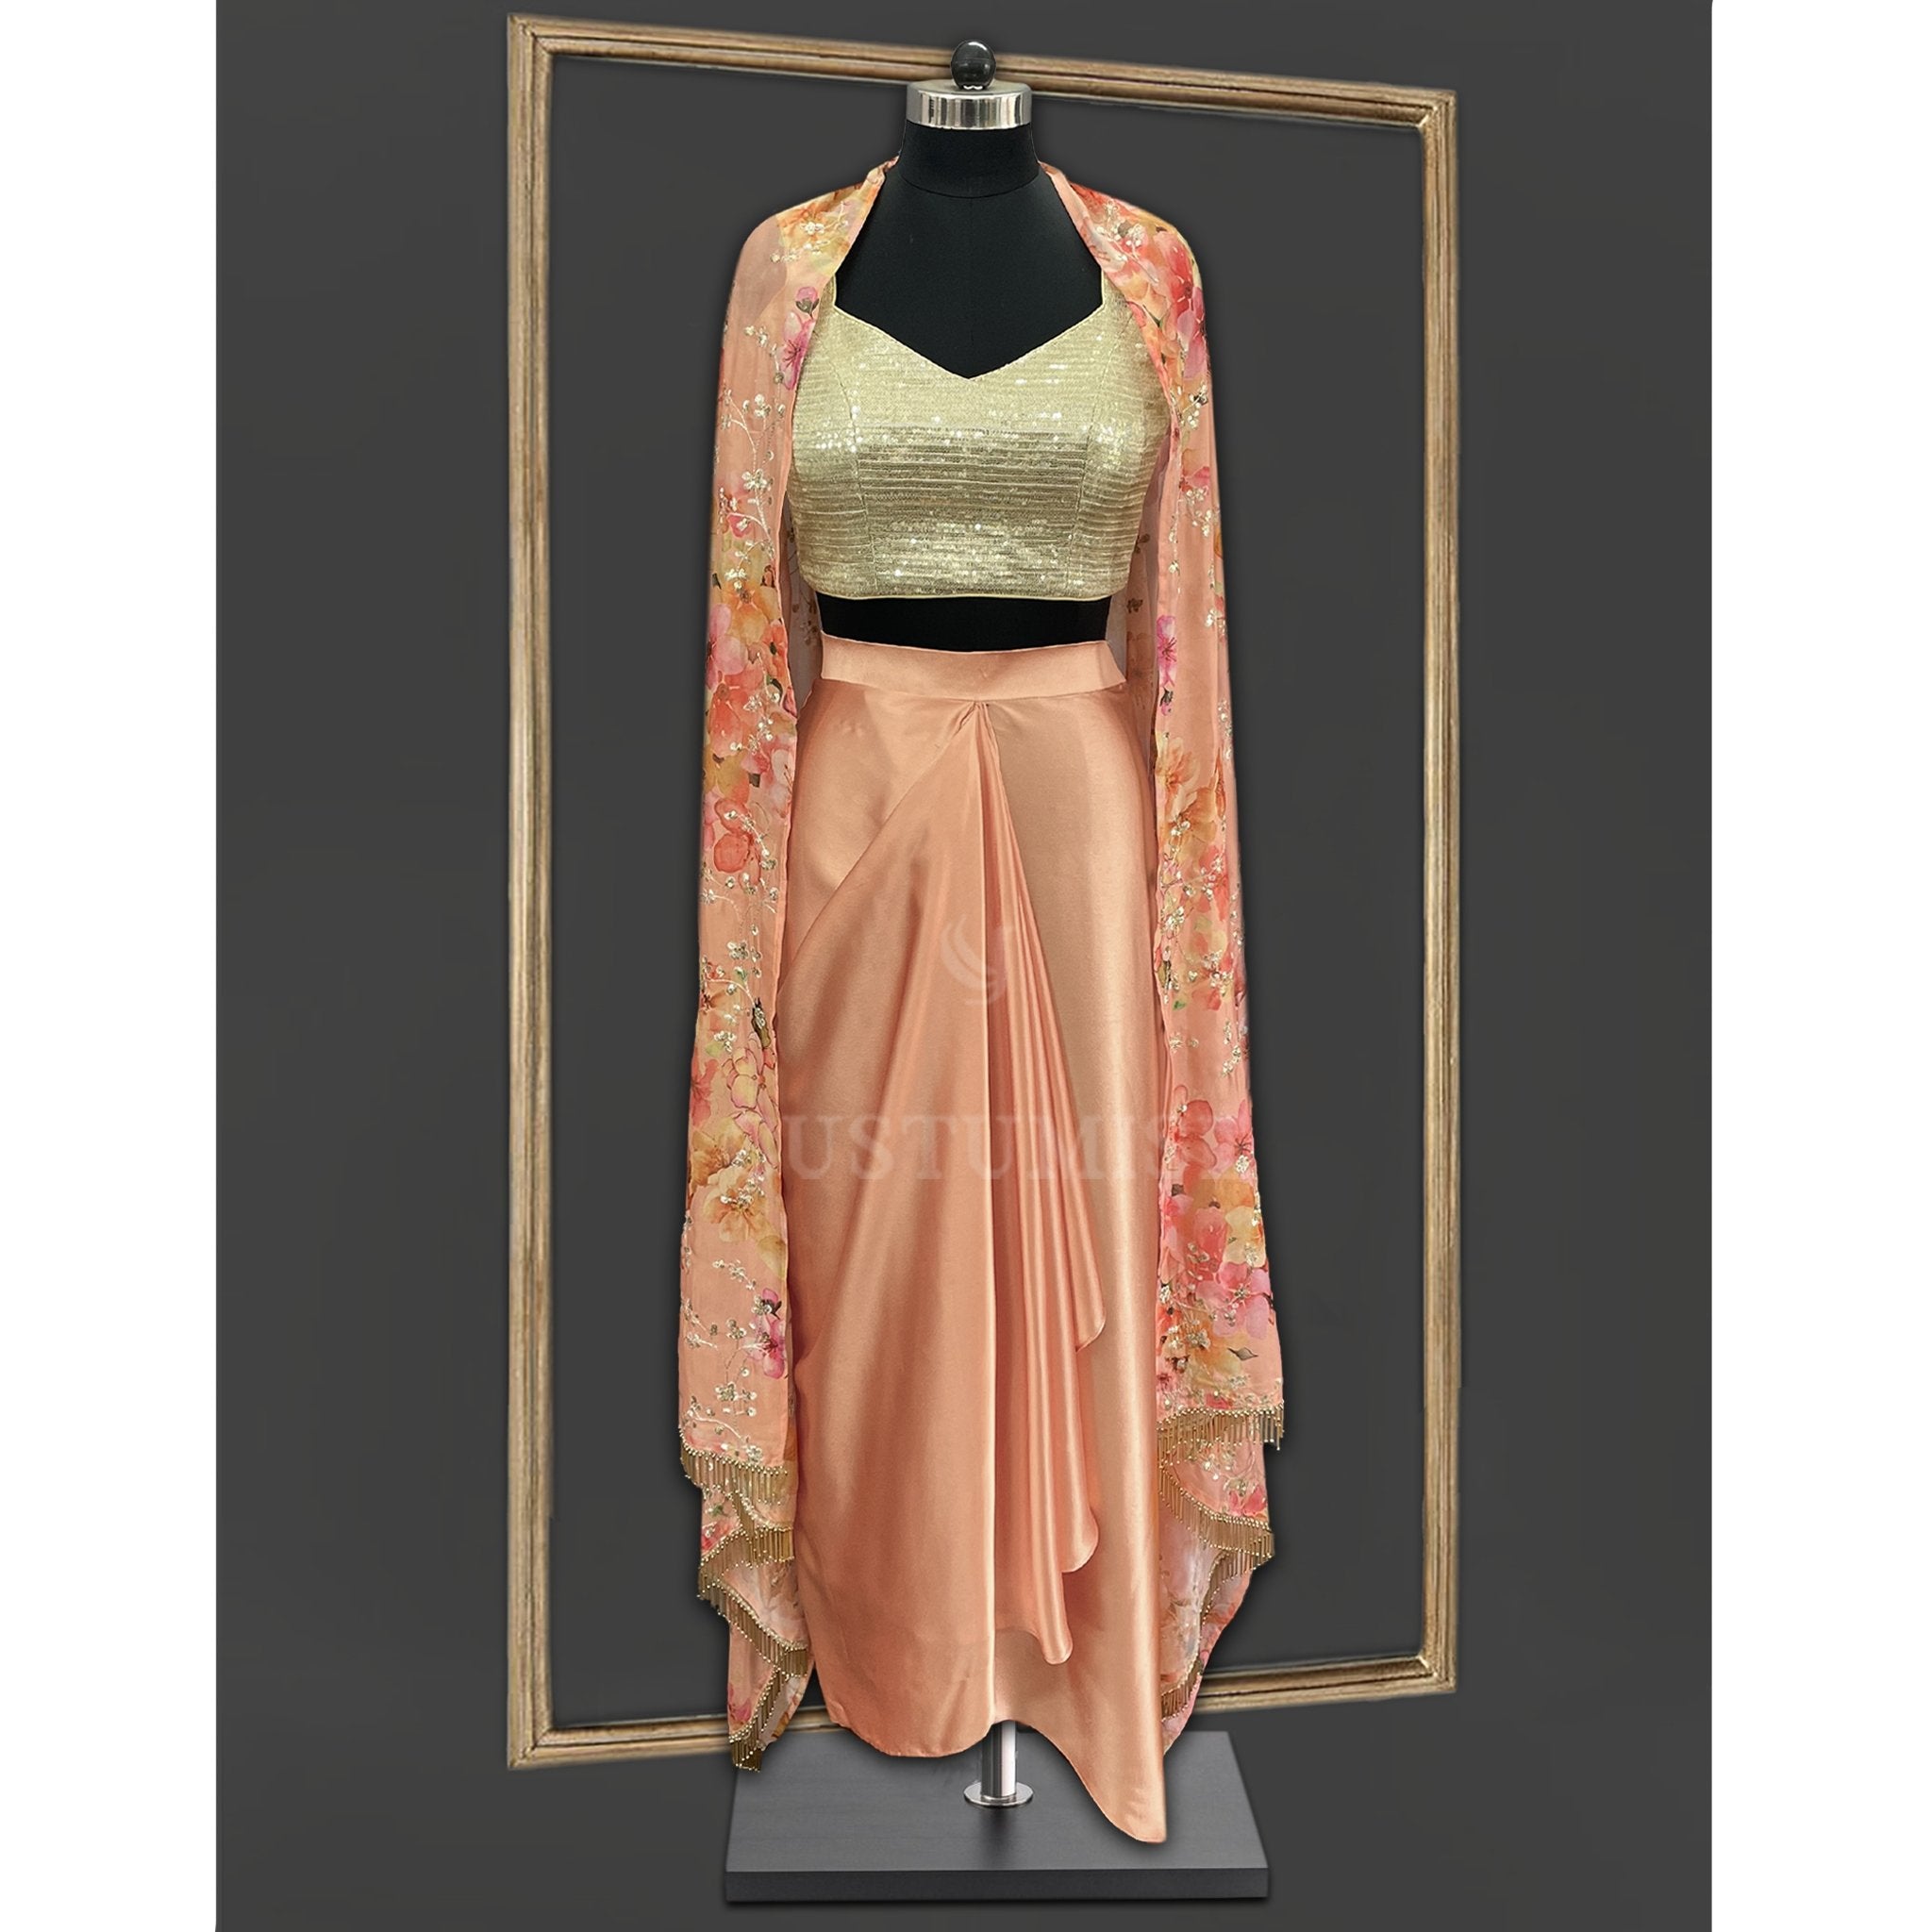 Gorgeous Peach Satin Dhoti with Floral Cape - Indian Designer Bridal Wedding Outfit